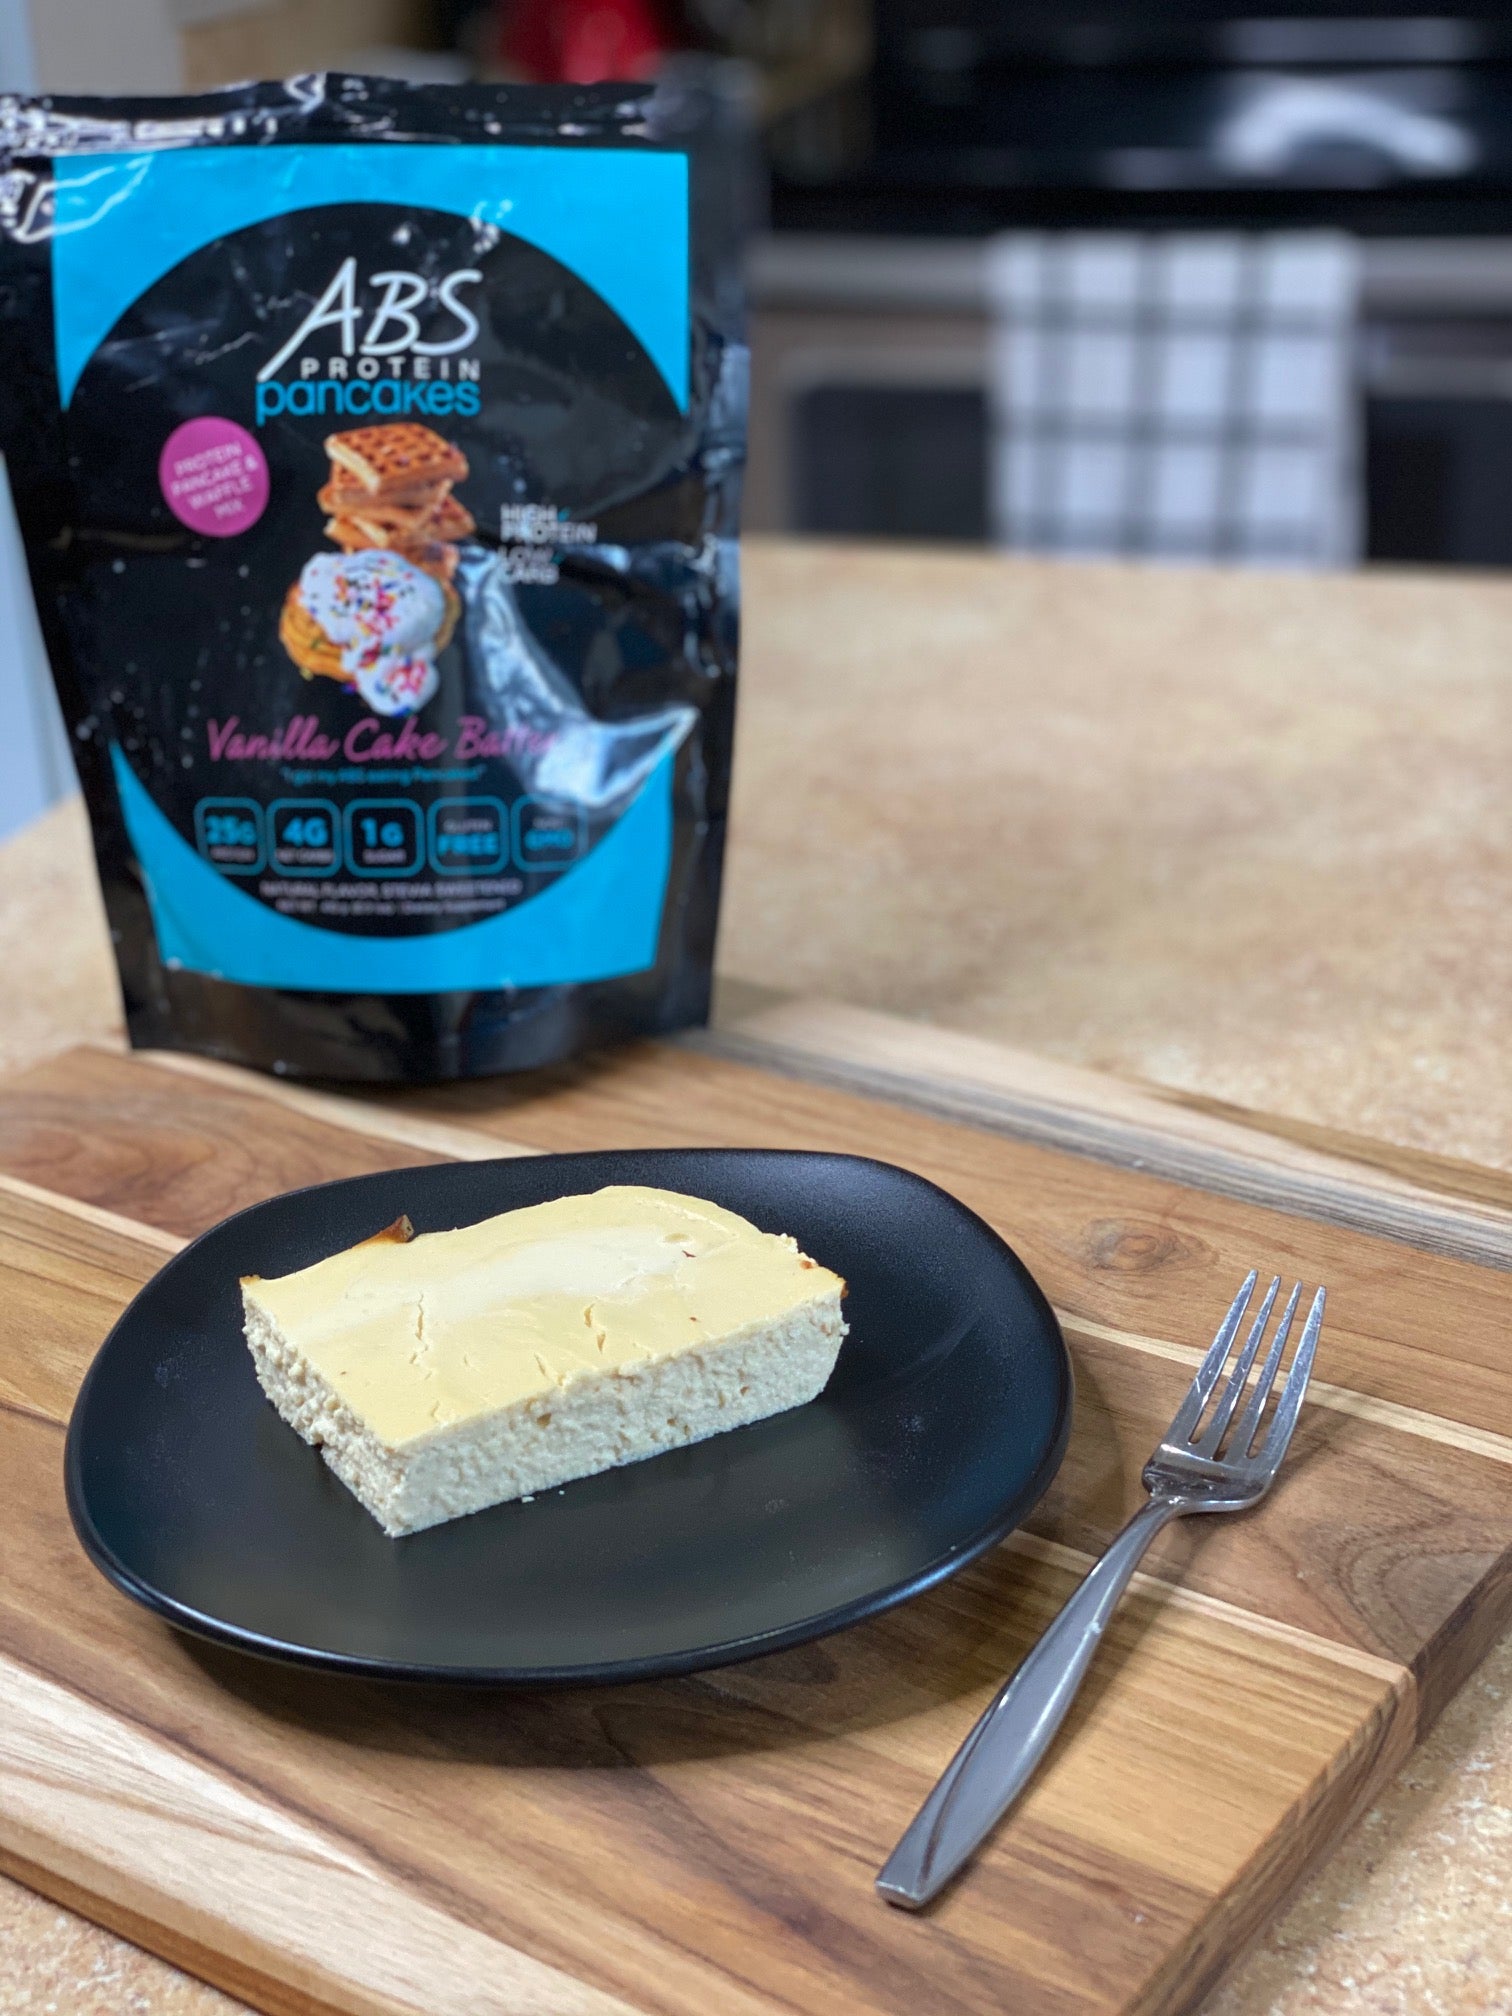 ABS Low Carb Protein Cheesecake